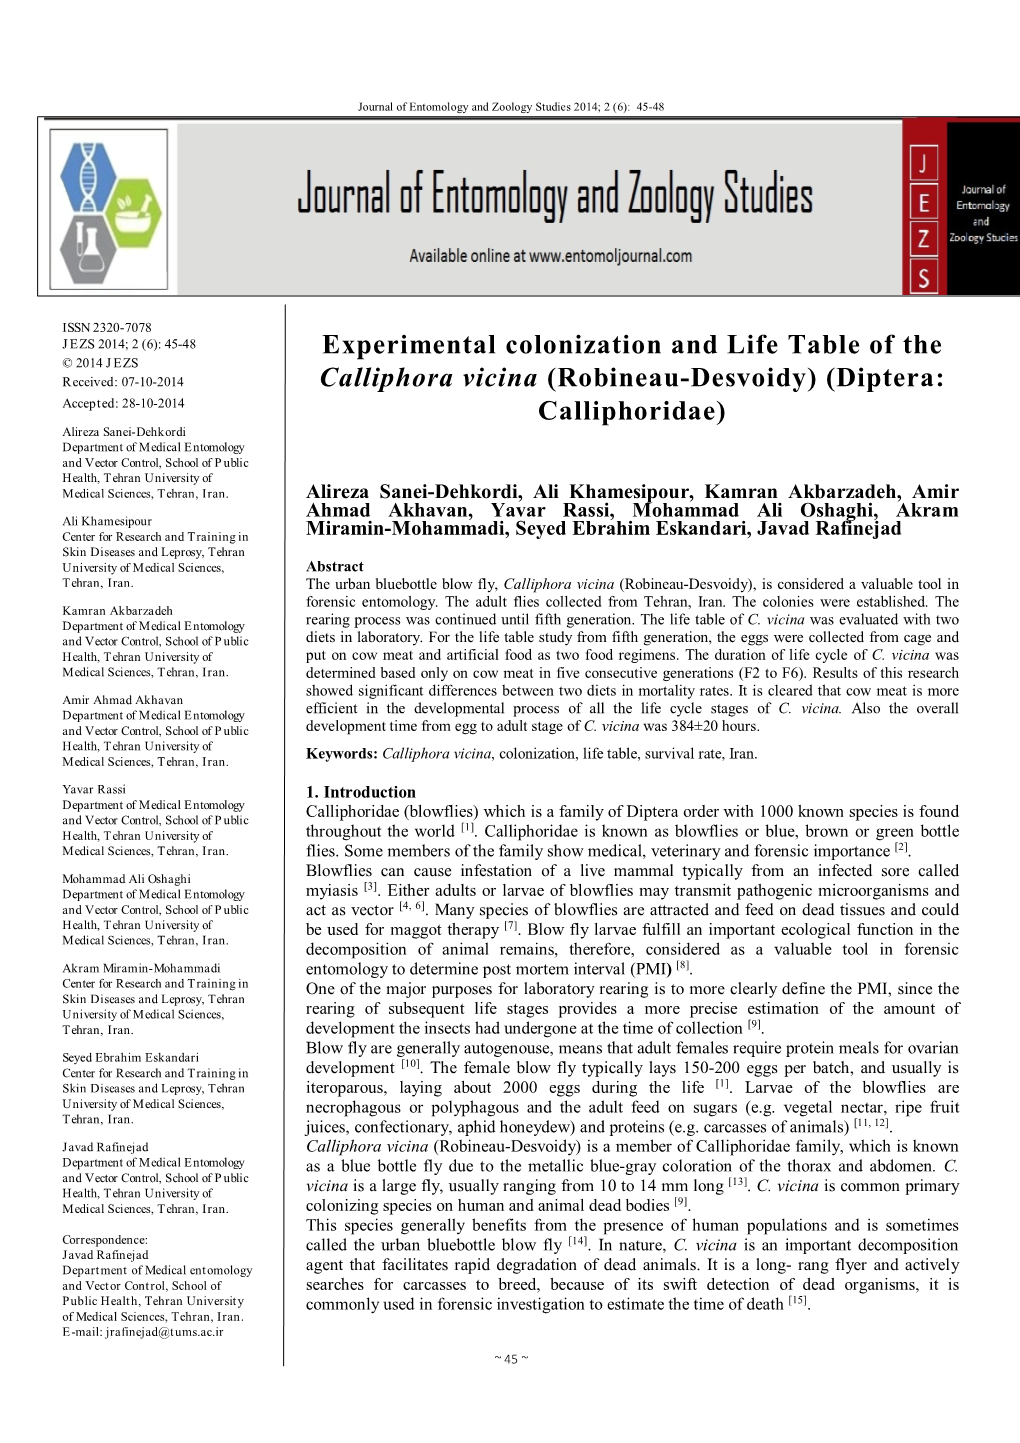 Experimental Colonization and Life Table of the Calliphora Vicina